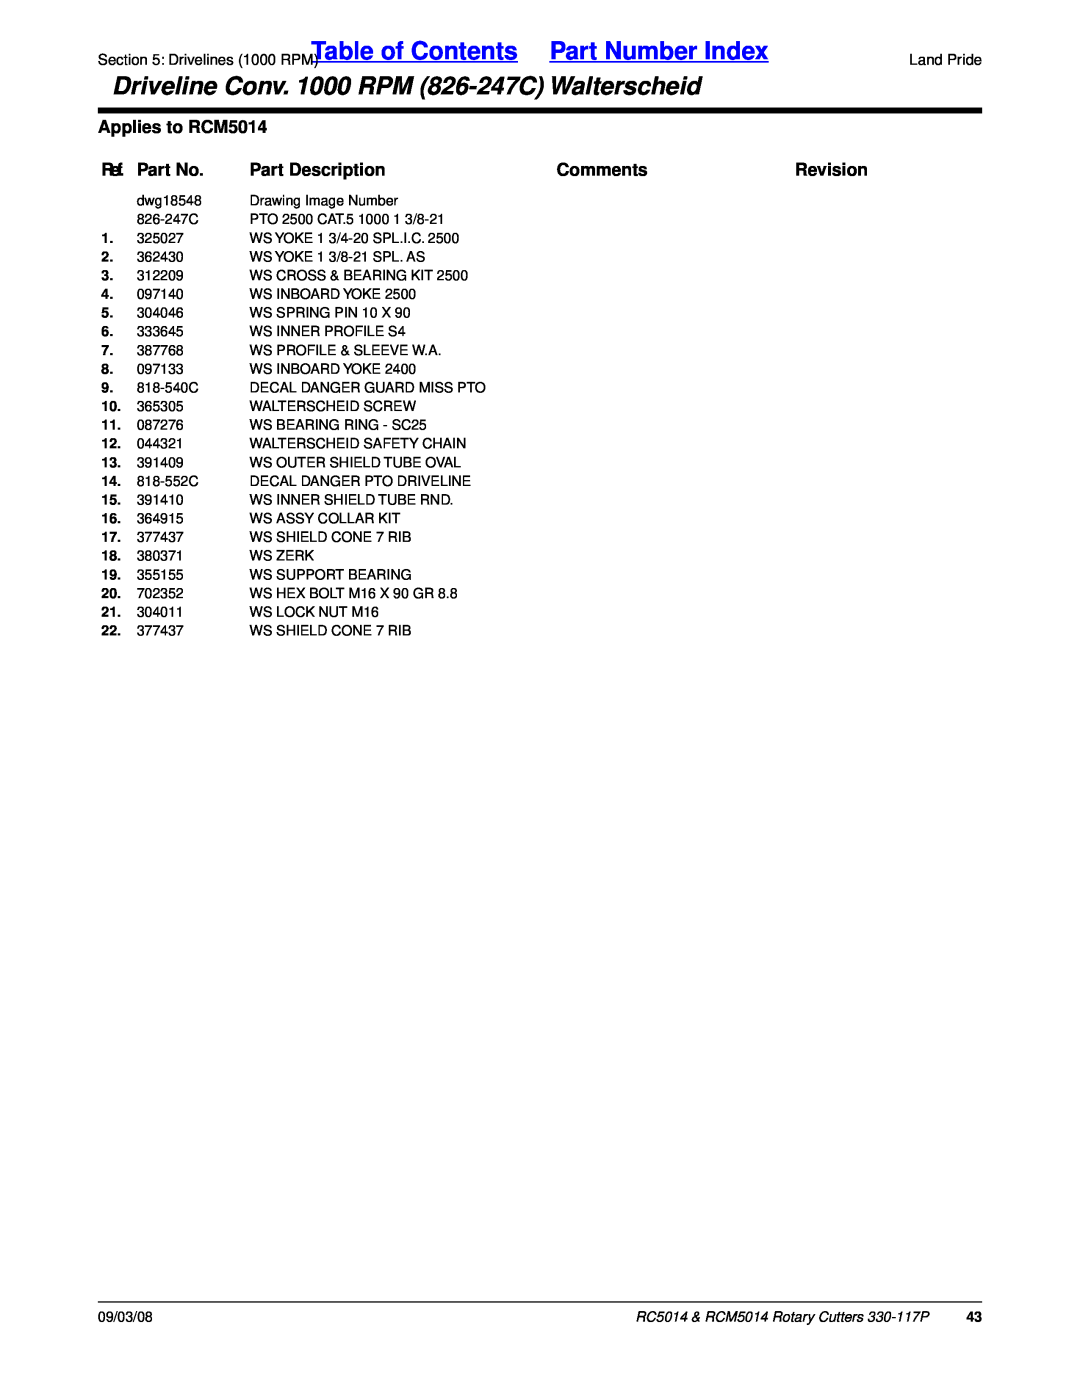 Land Pride Table of Contents, Part Number Index, Driveline Conv. 1000 RPM 826-247CWalterscheid, Applies to RCM5014 